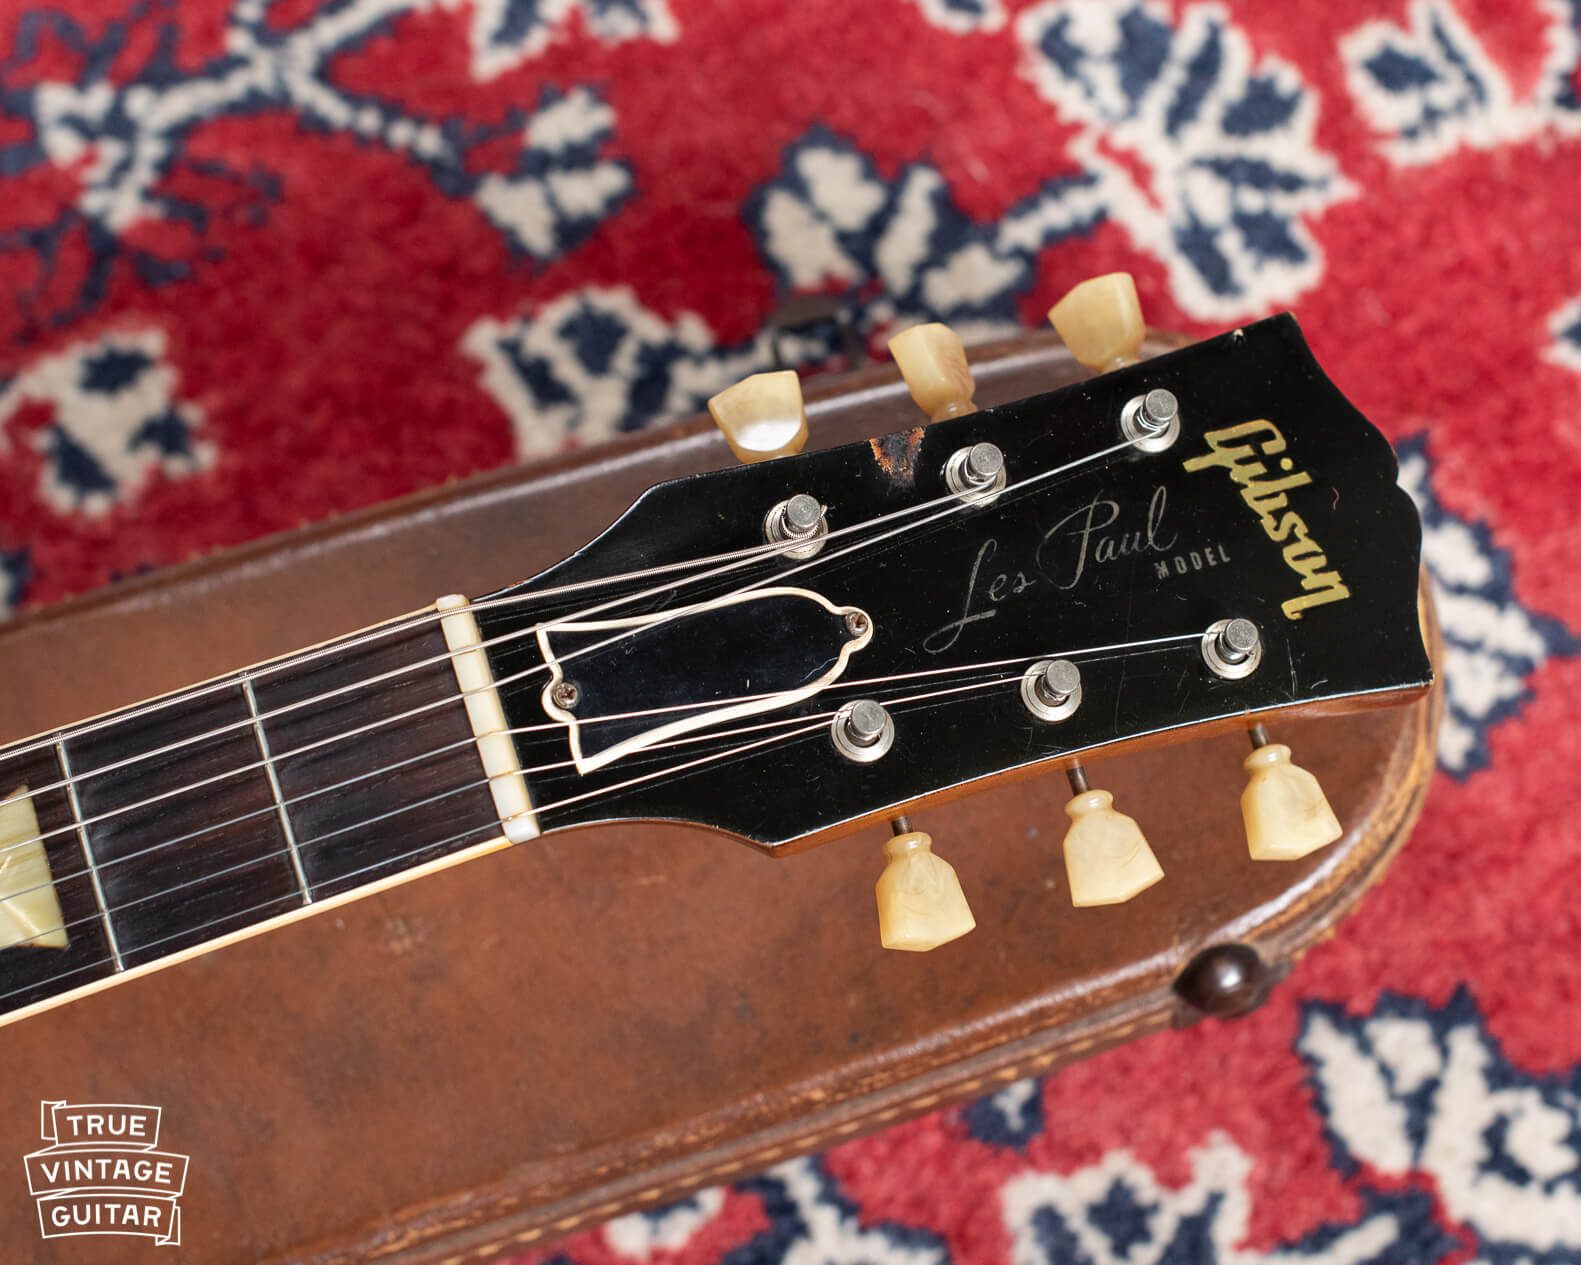 Gibson Les Paul 1954 neck and pearl Gibson logo